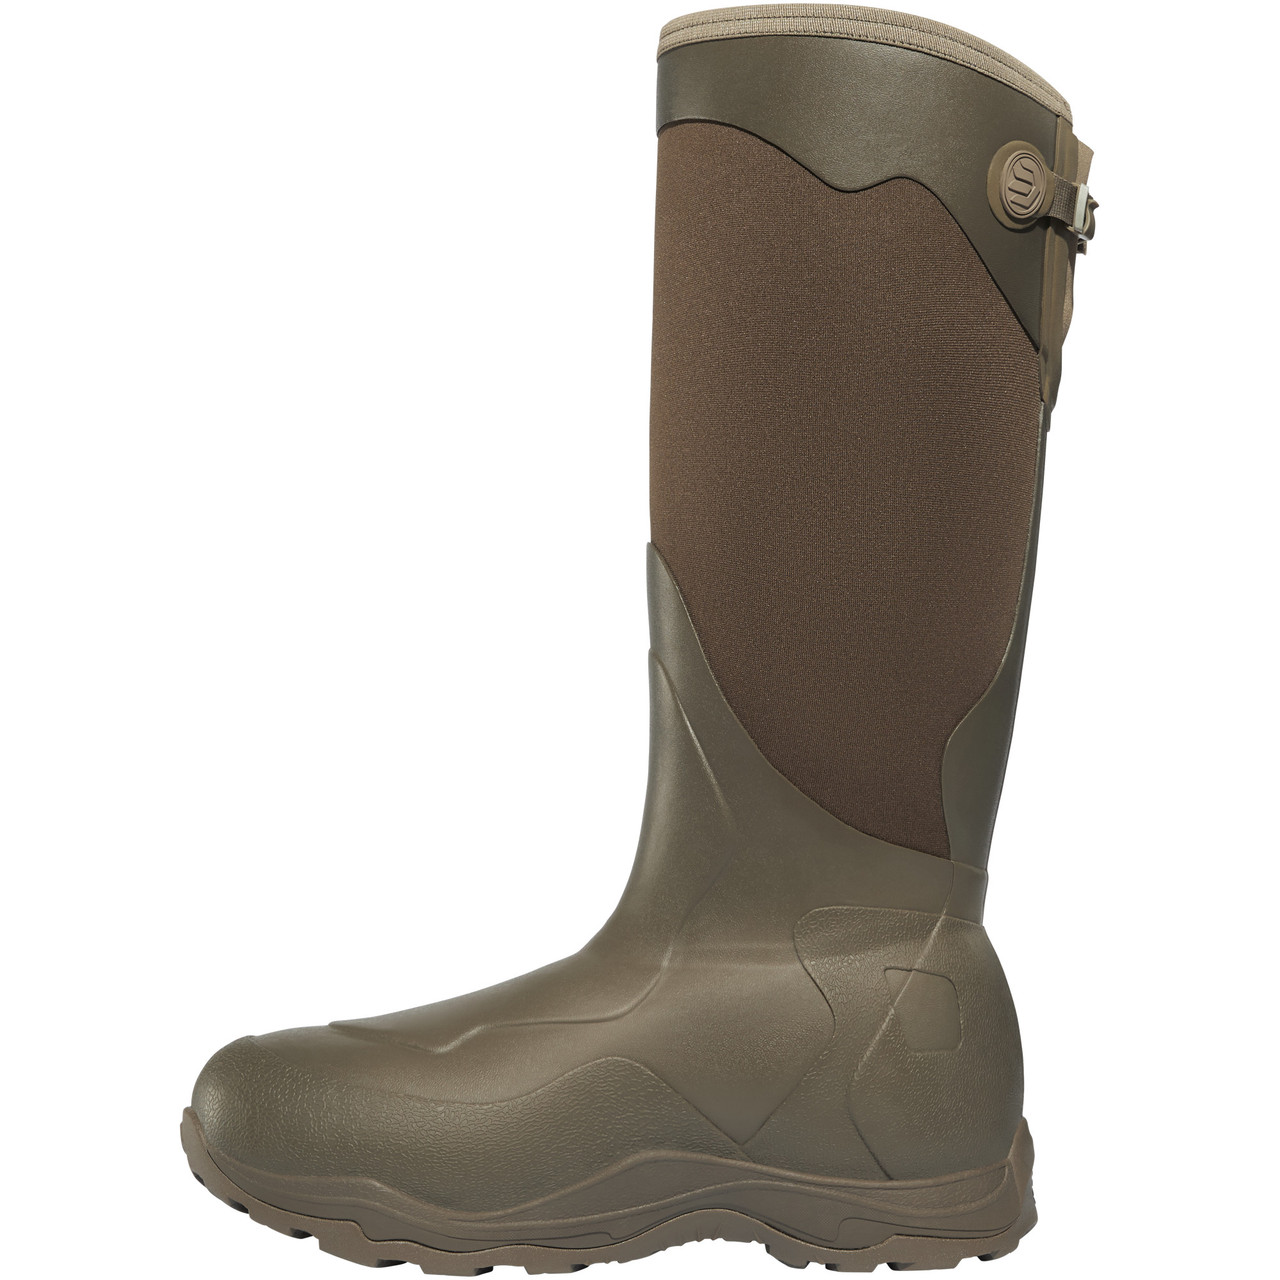 LACROSSE ALPHA AGILITY 17" BROWN 1200G HUNT BOOTS 302447